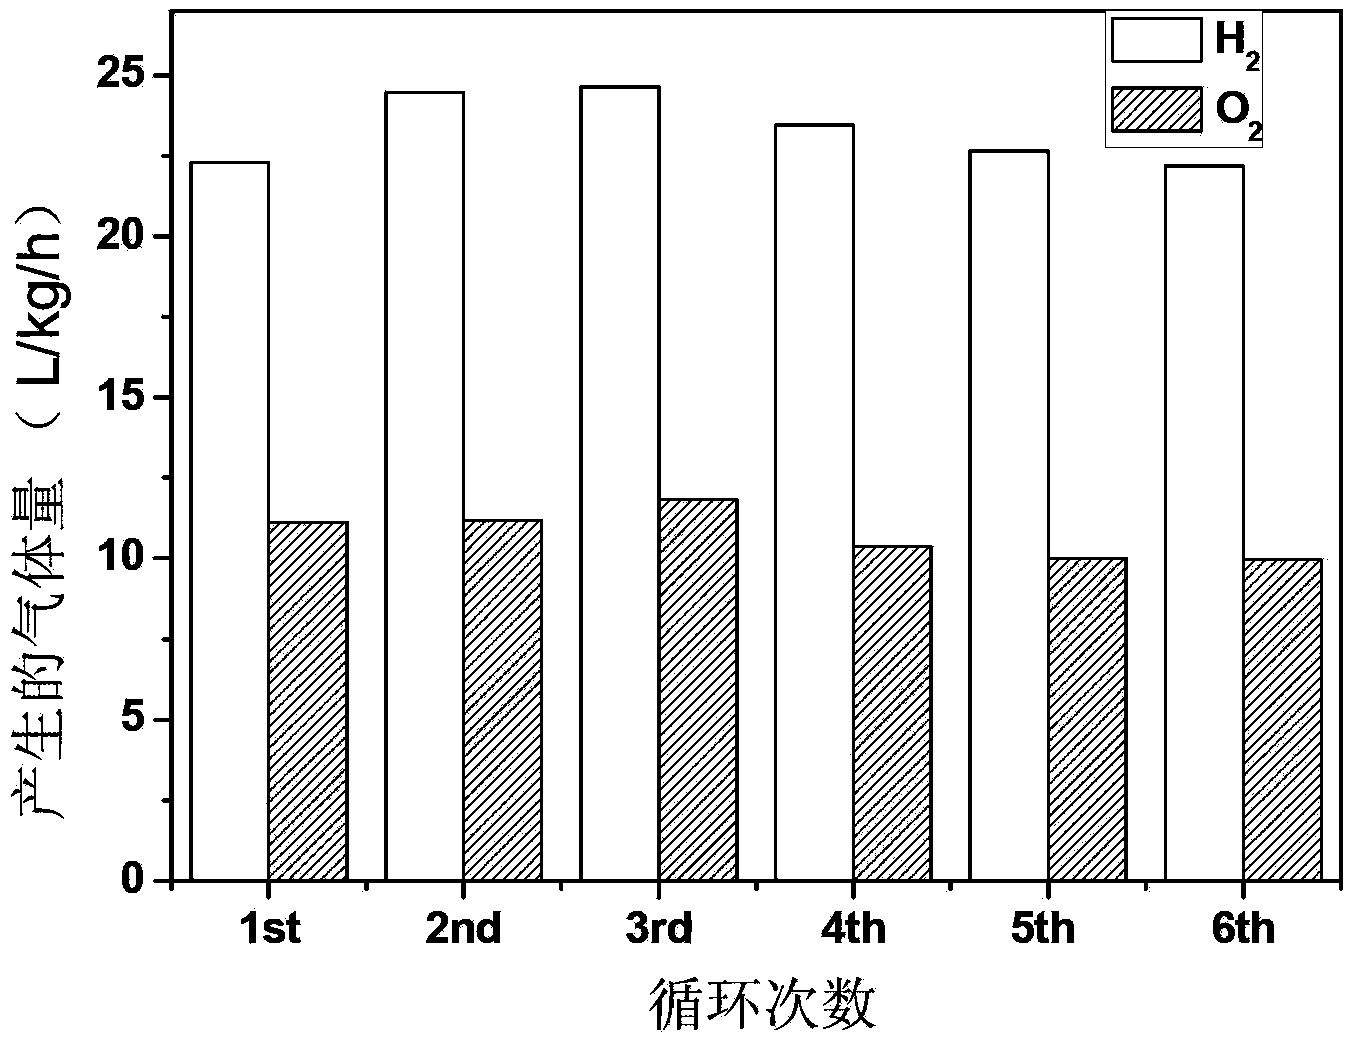 Method for producing hydrogen and oxygen through solar photocatalysis of water based on metal oxide photocatalyst